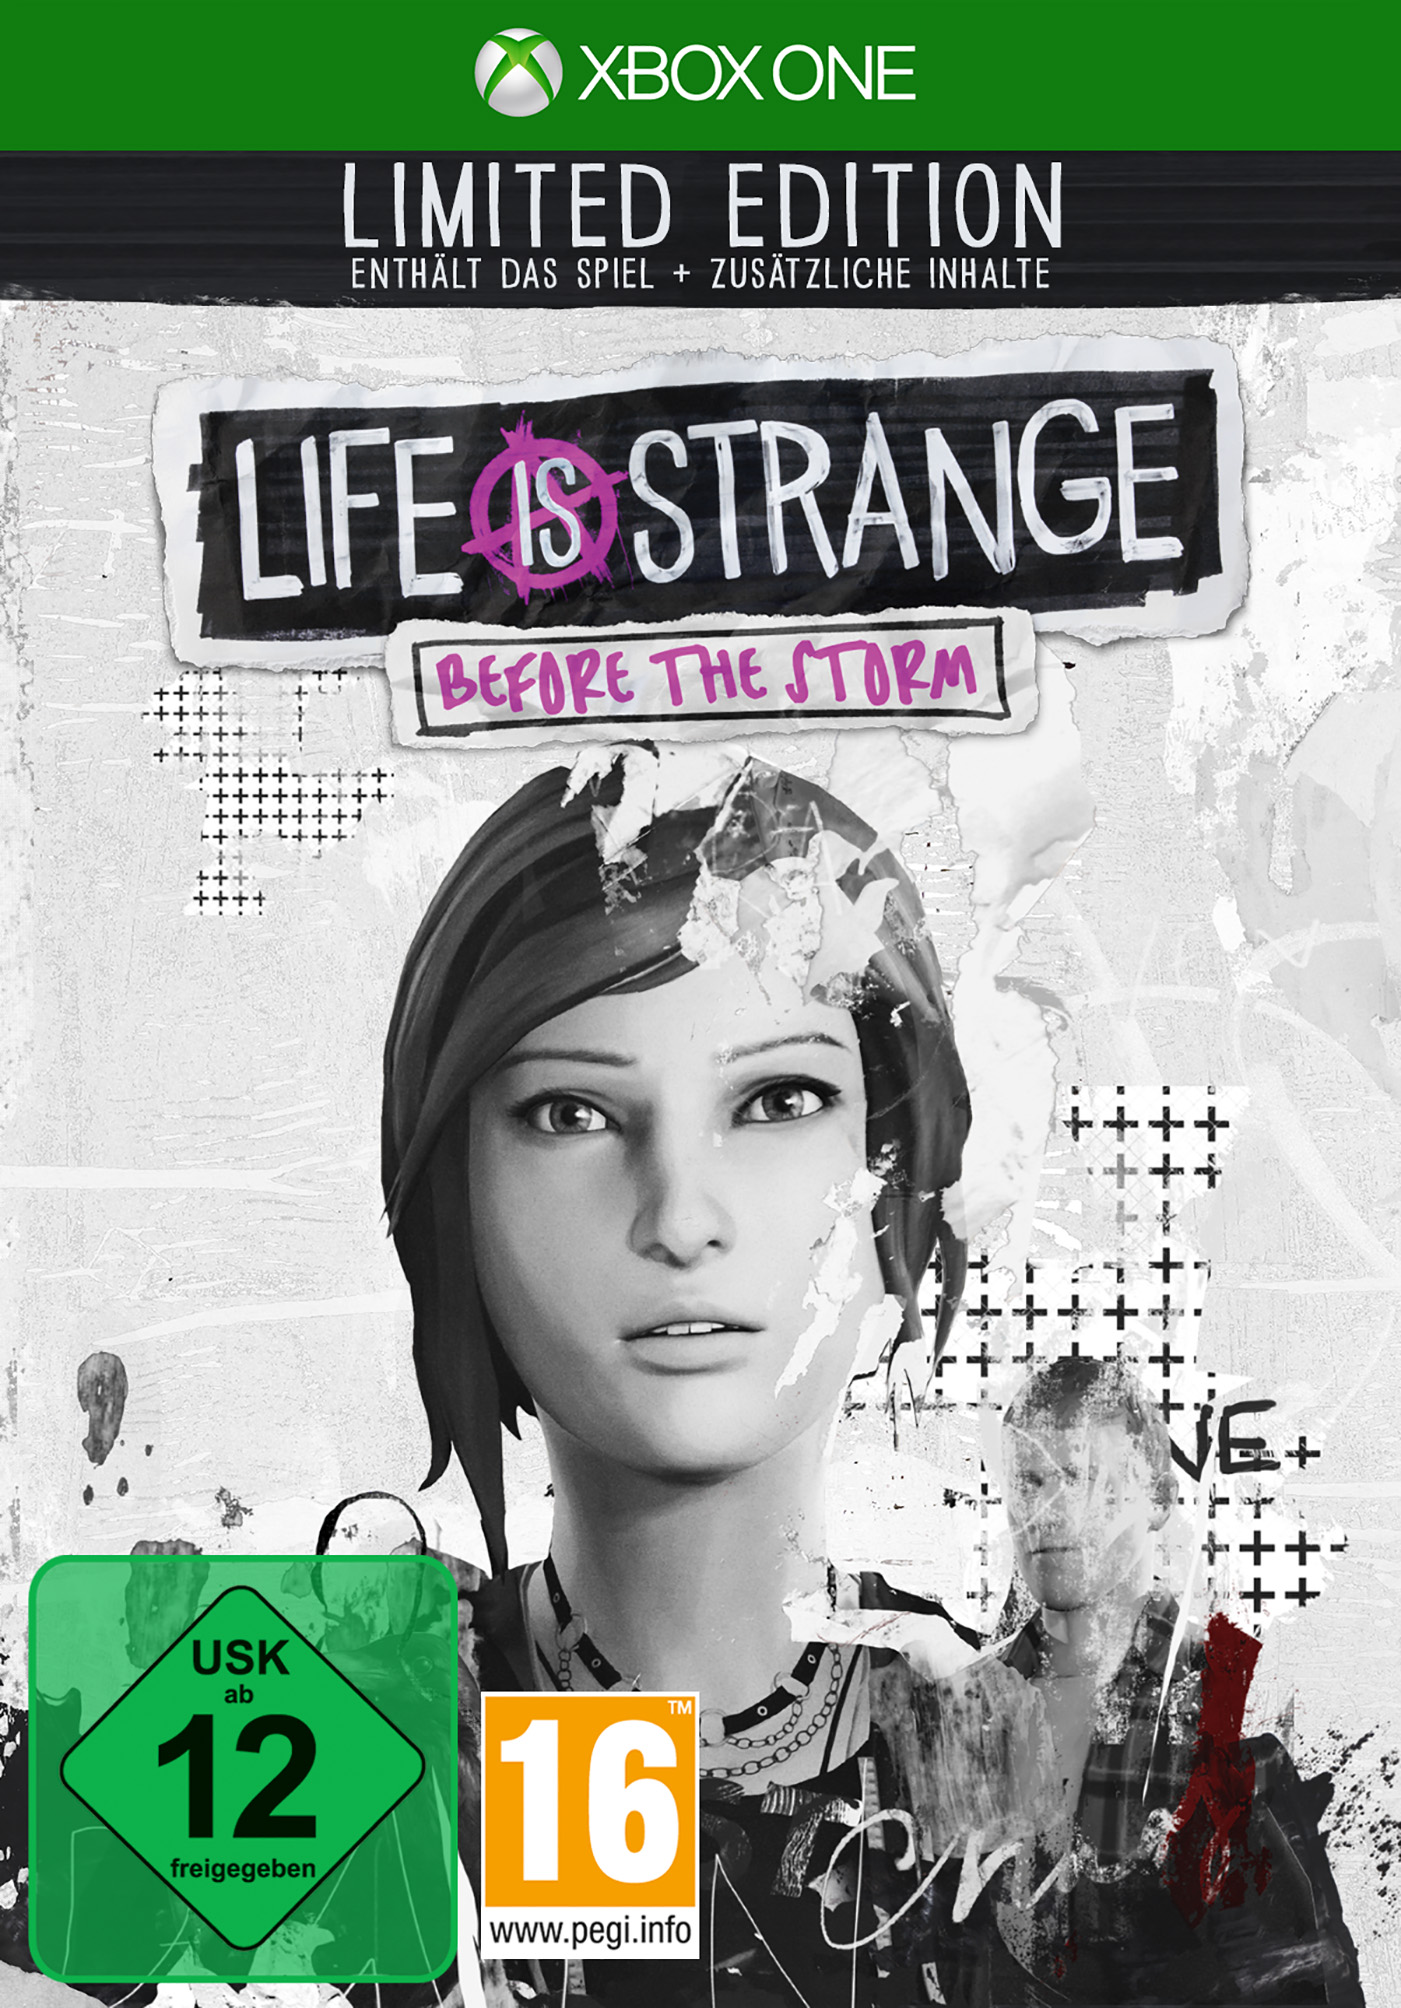 The Strange: Before Life One] Storm - Limited Edition Is - [Xbox